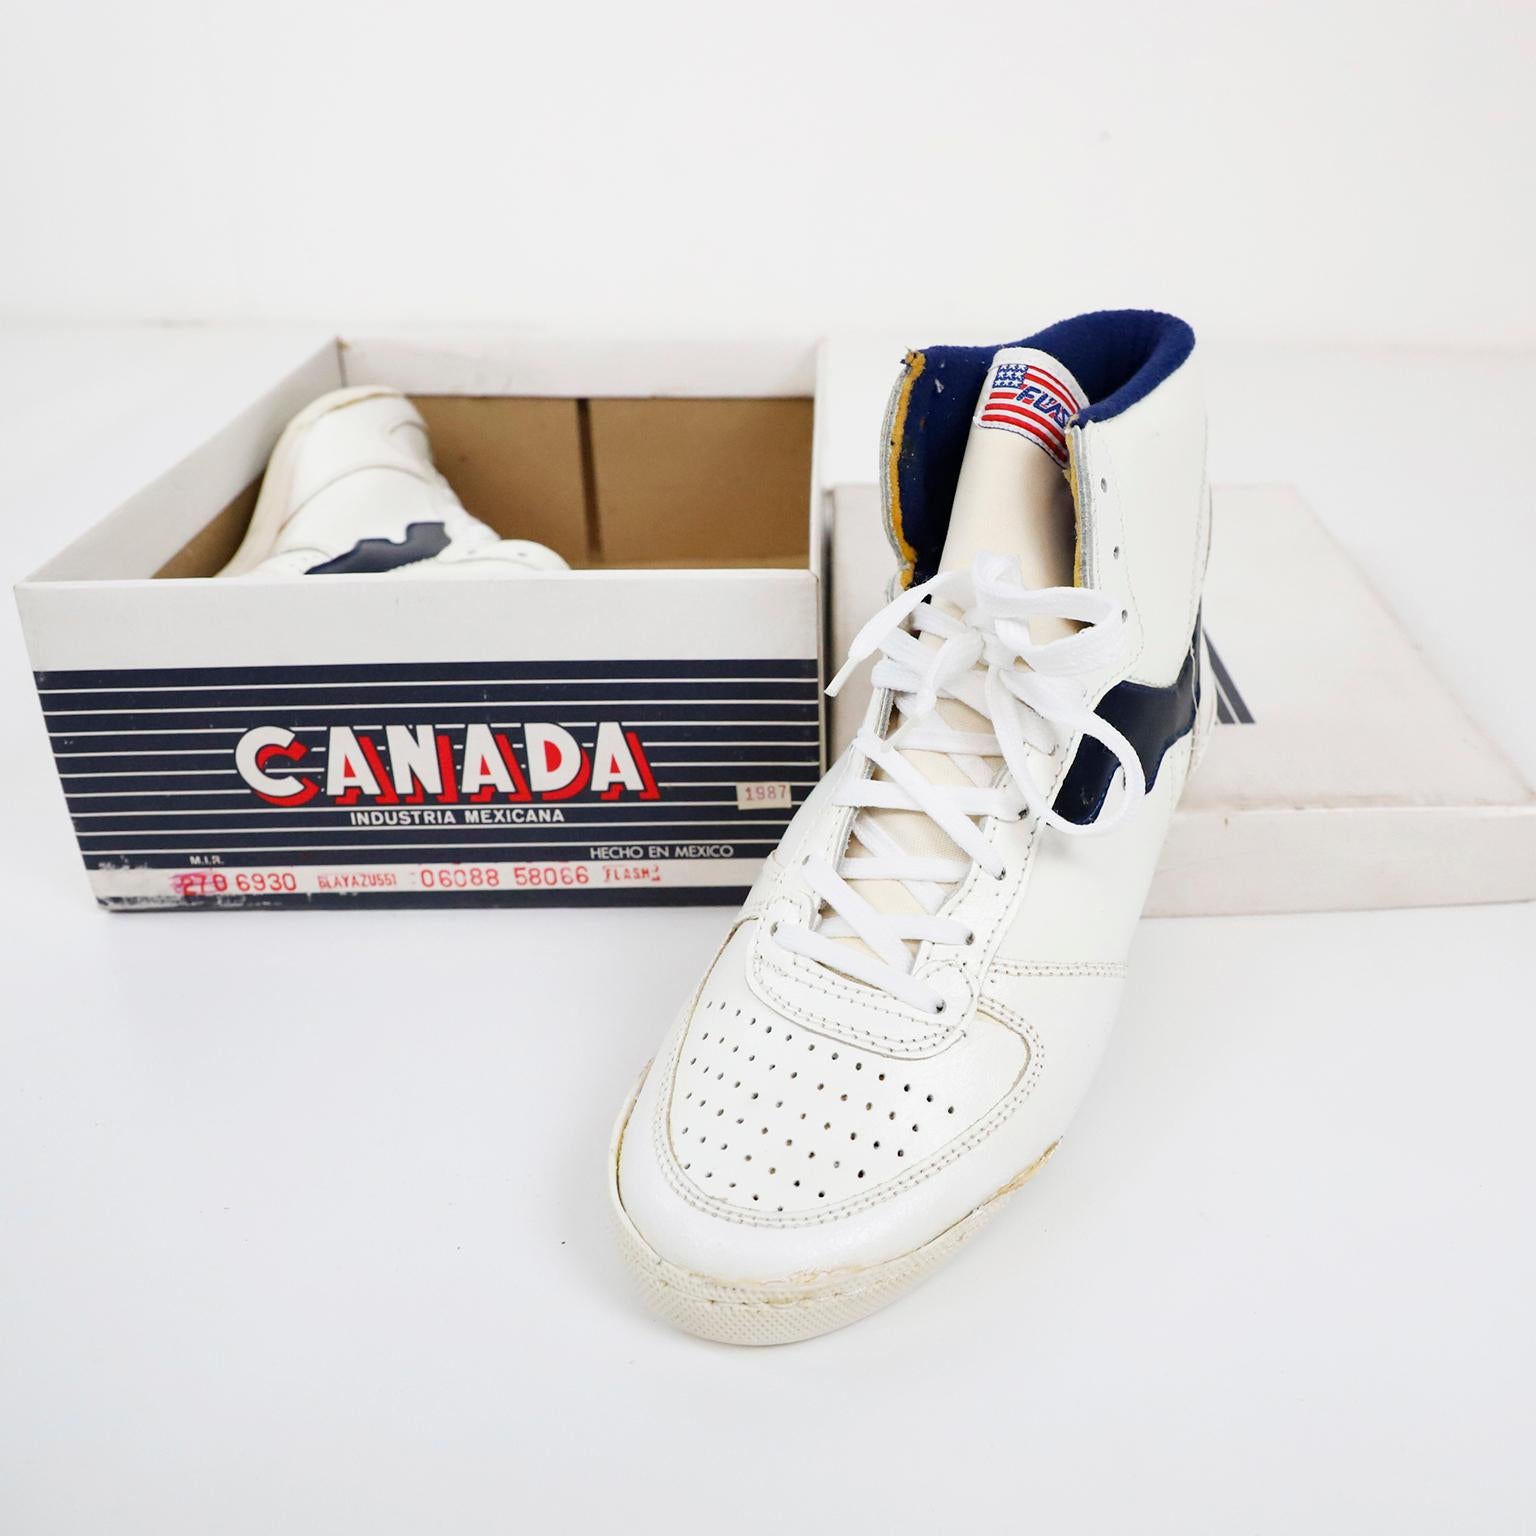 Other Pair of Canada Sneakers Never Used, 1970s For Sale